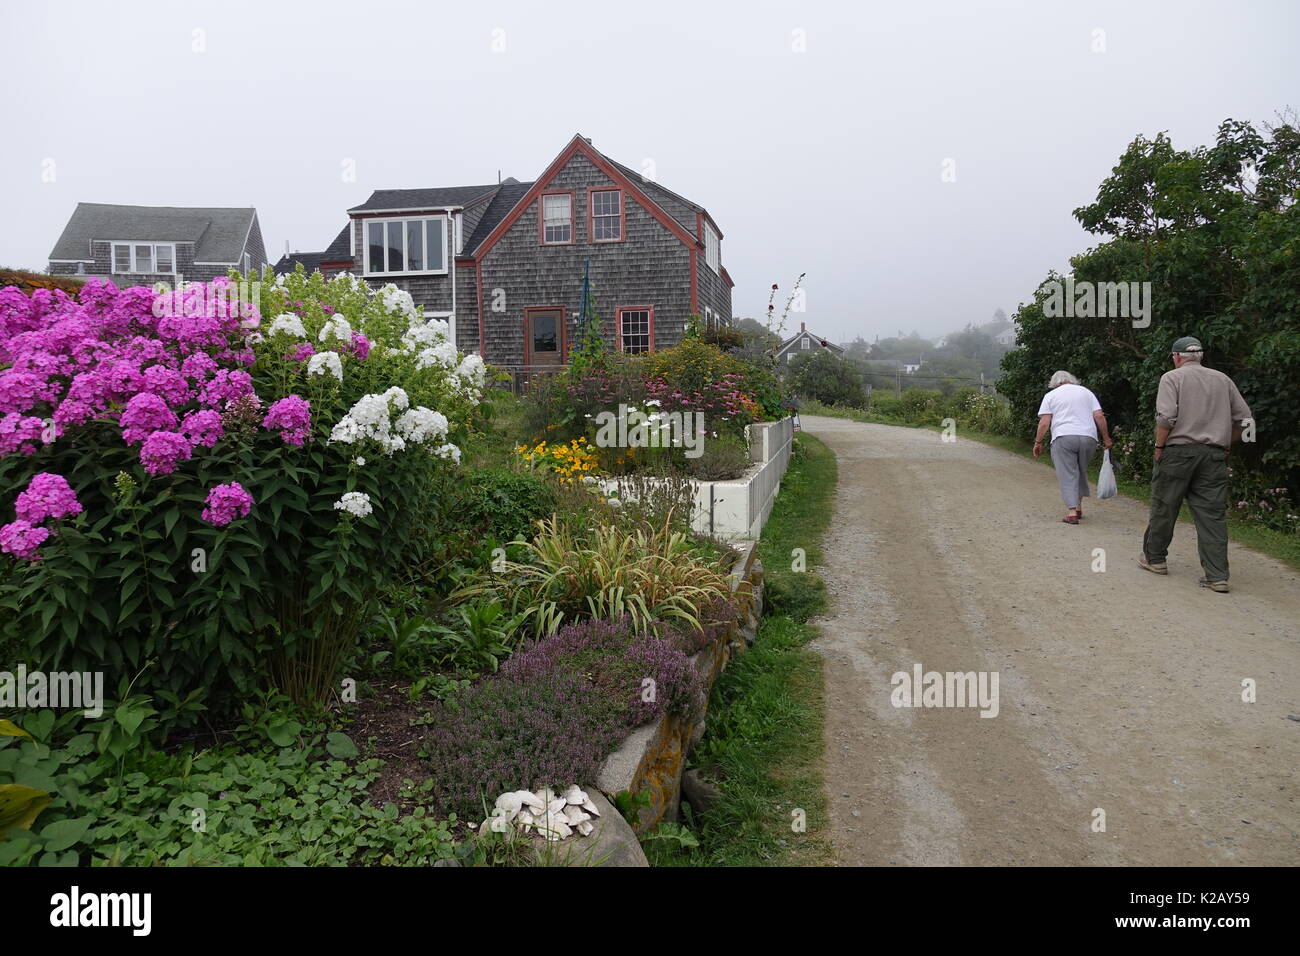 USA Maine ME Monhegan Island in Penobscot Bay in the Atalntic Ocean An older couple walking on Lobster Cove Road Stock Photo